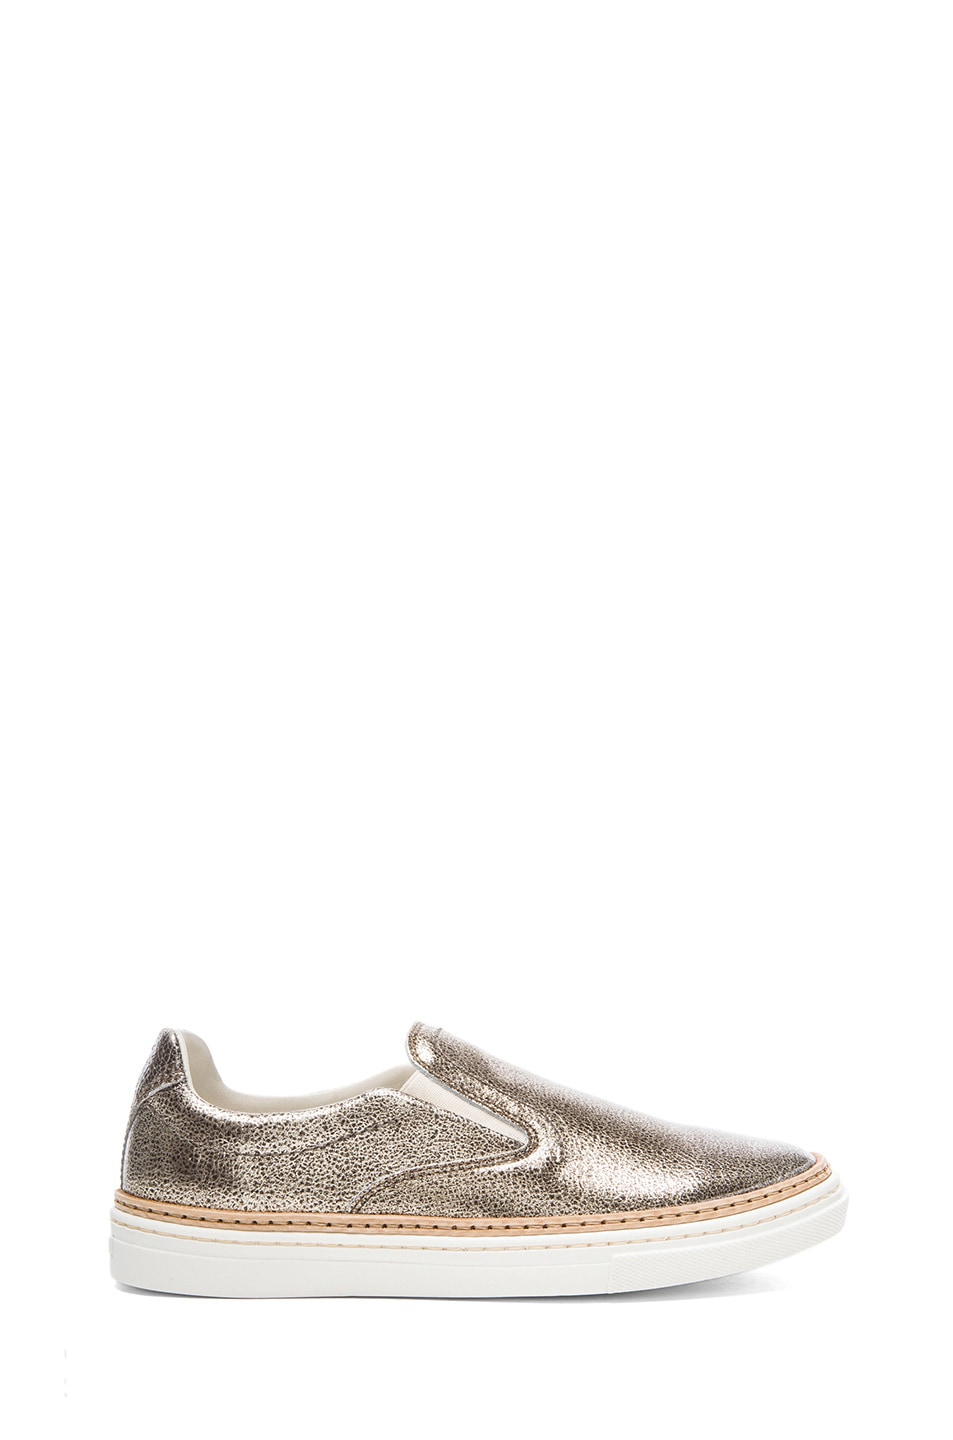 Maison Margiela Crackle Leather Sneakers in Platinum & Brown | FWRD